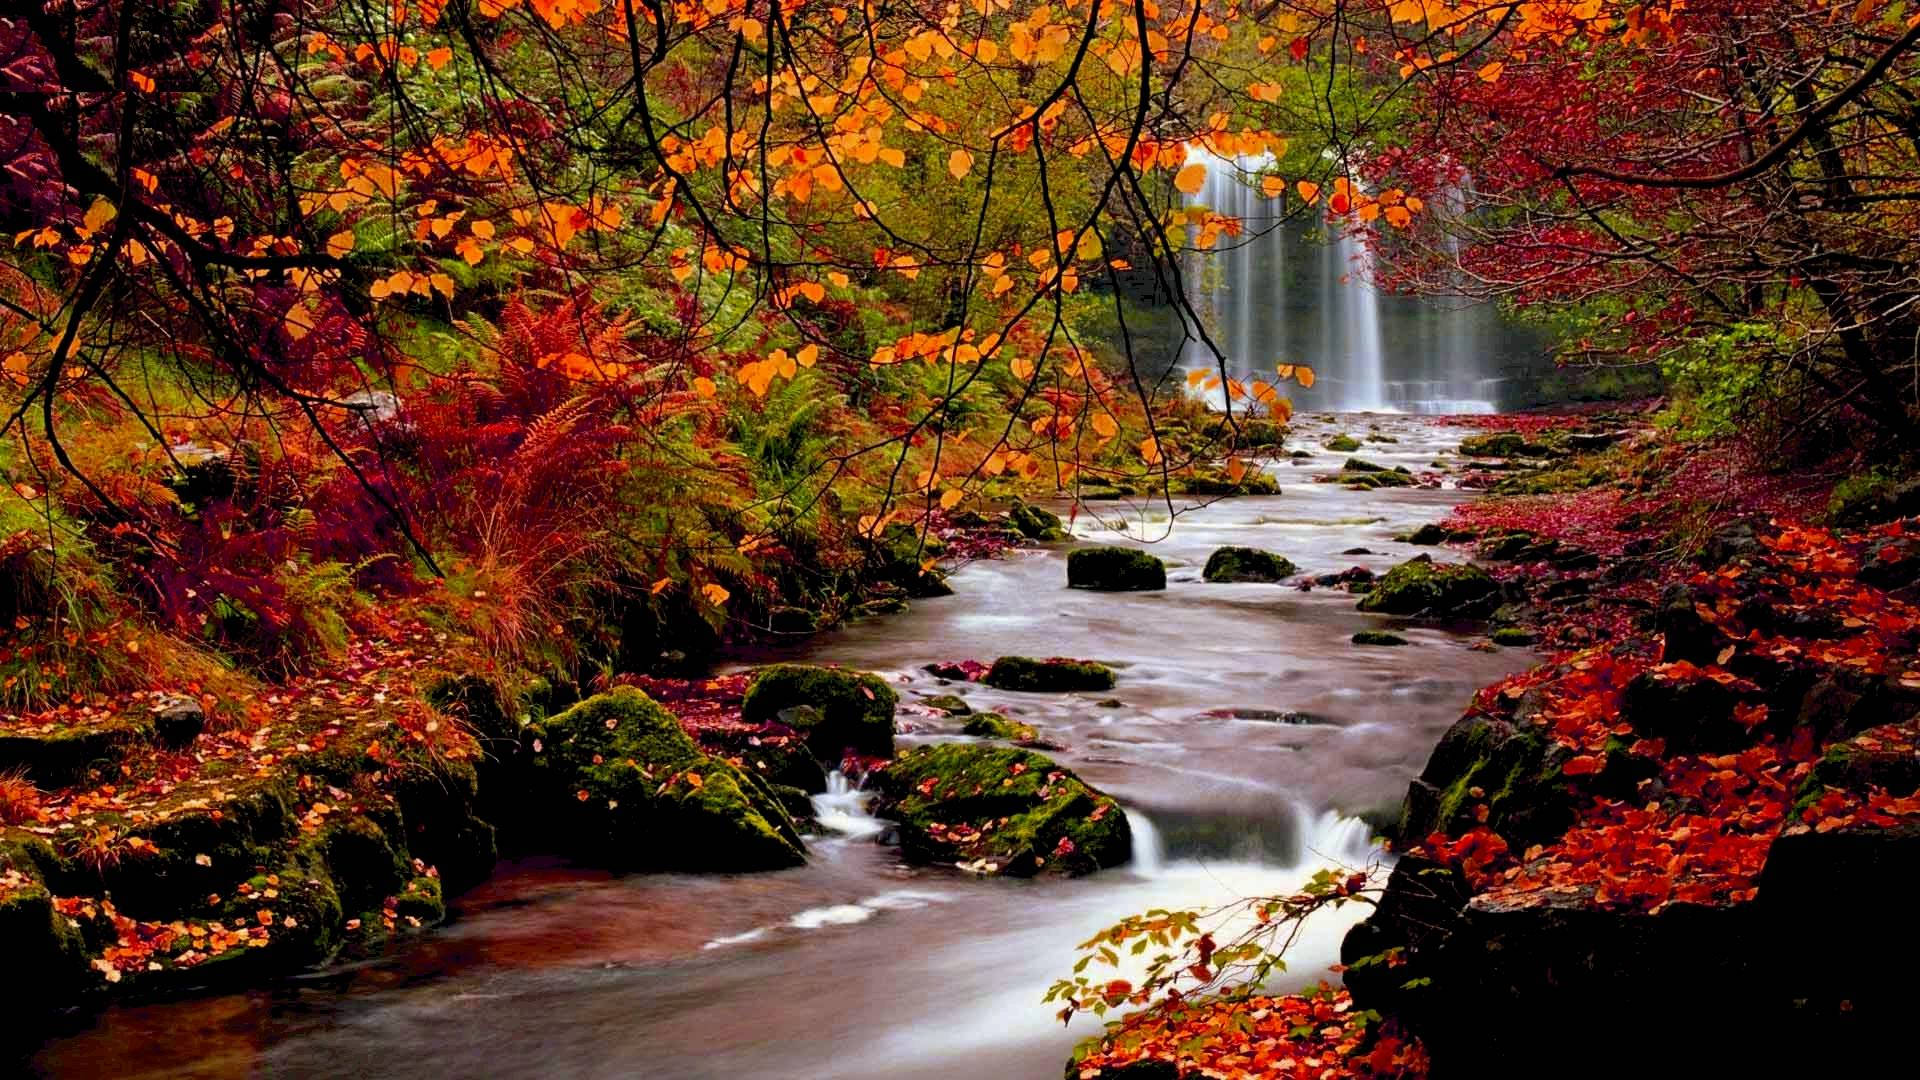 Download Autumn Landscape With Colorful Maple Trees And Waterfalls Wallpaper